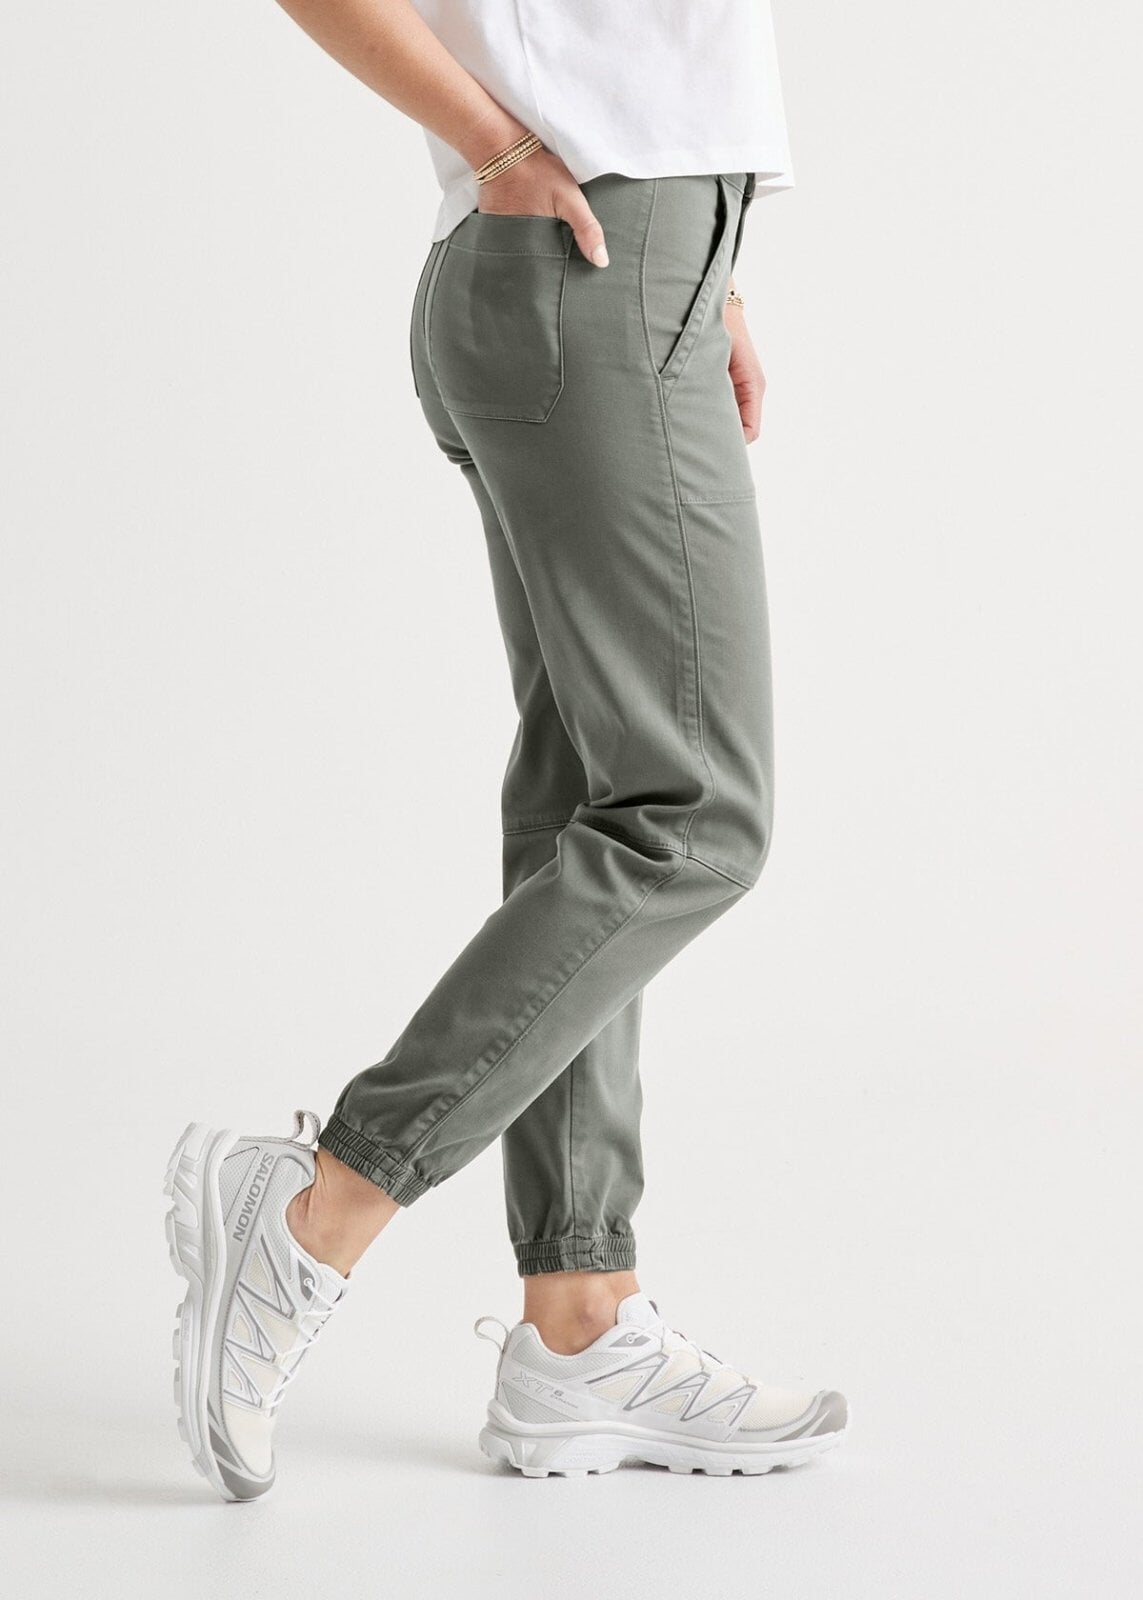 womens high rise green athletic jogger side